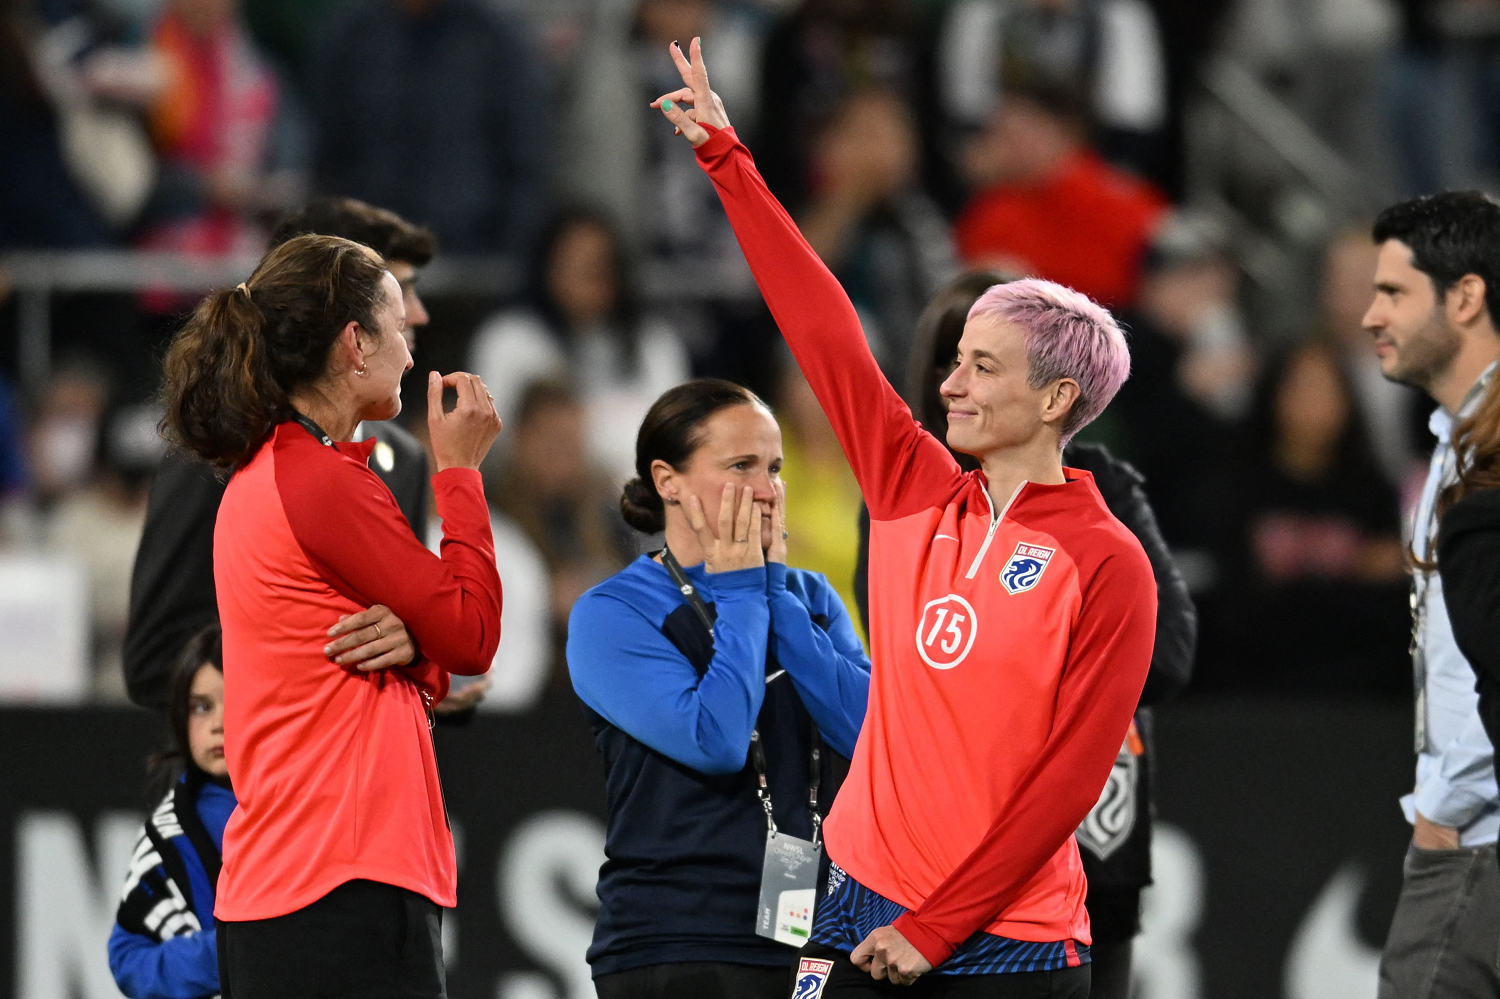 Megan Rapinoe's professional career ends with injury in NWSL championship match